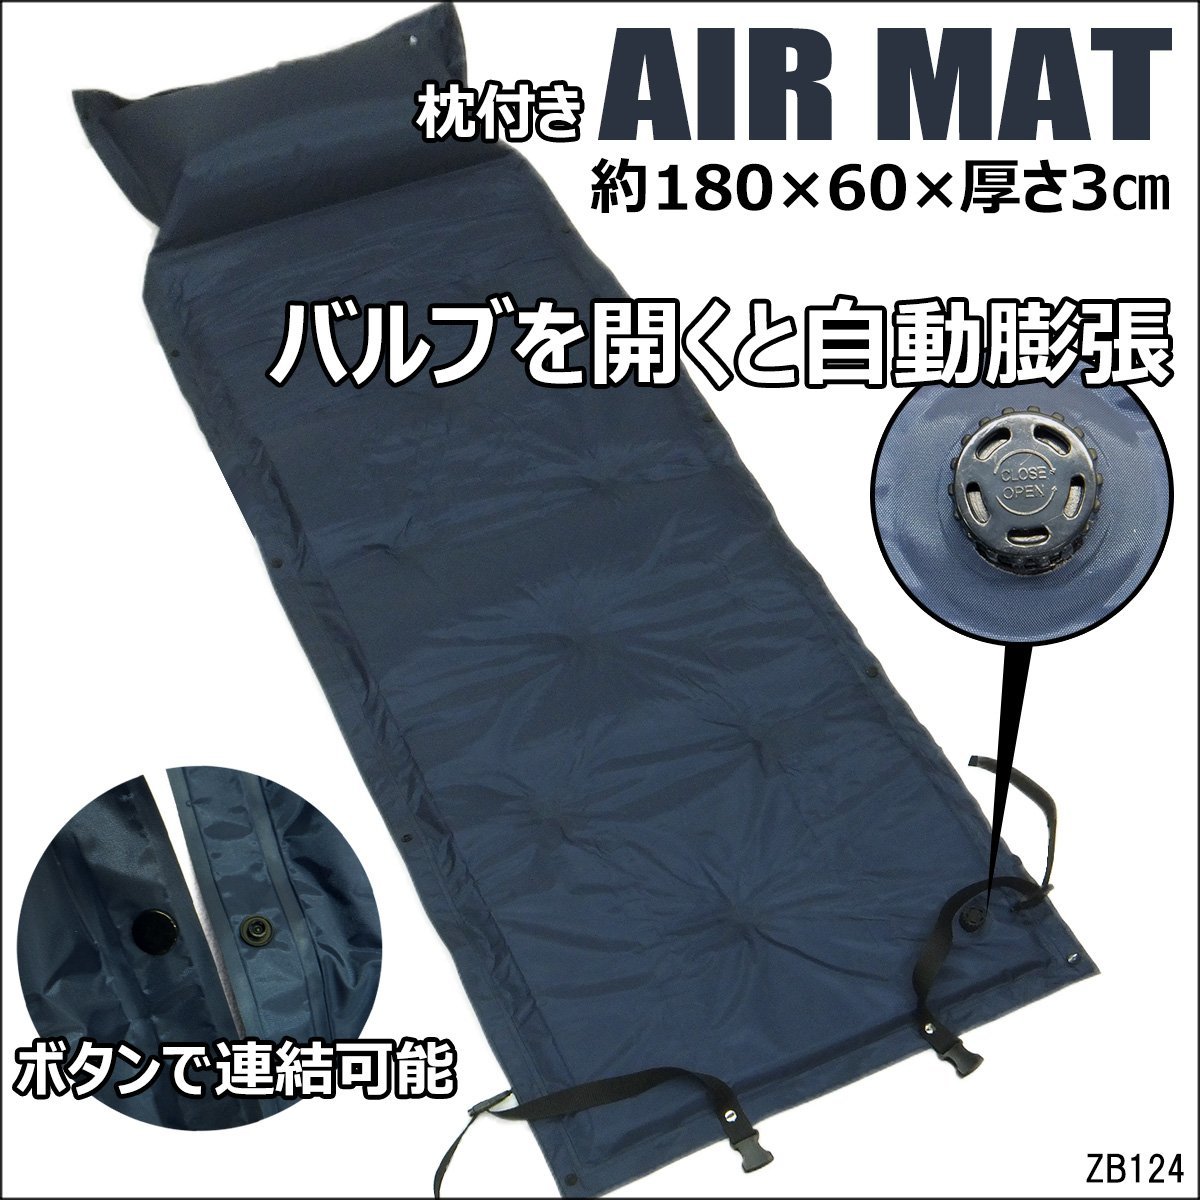  air mat pillow attaching automatic expansion sleeping area in the vehicle outdoor disaster prevention connection possibility air mattress /16